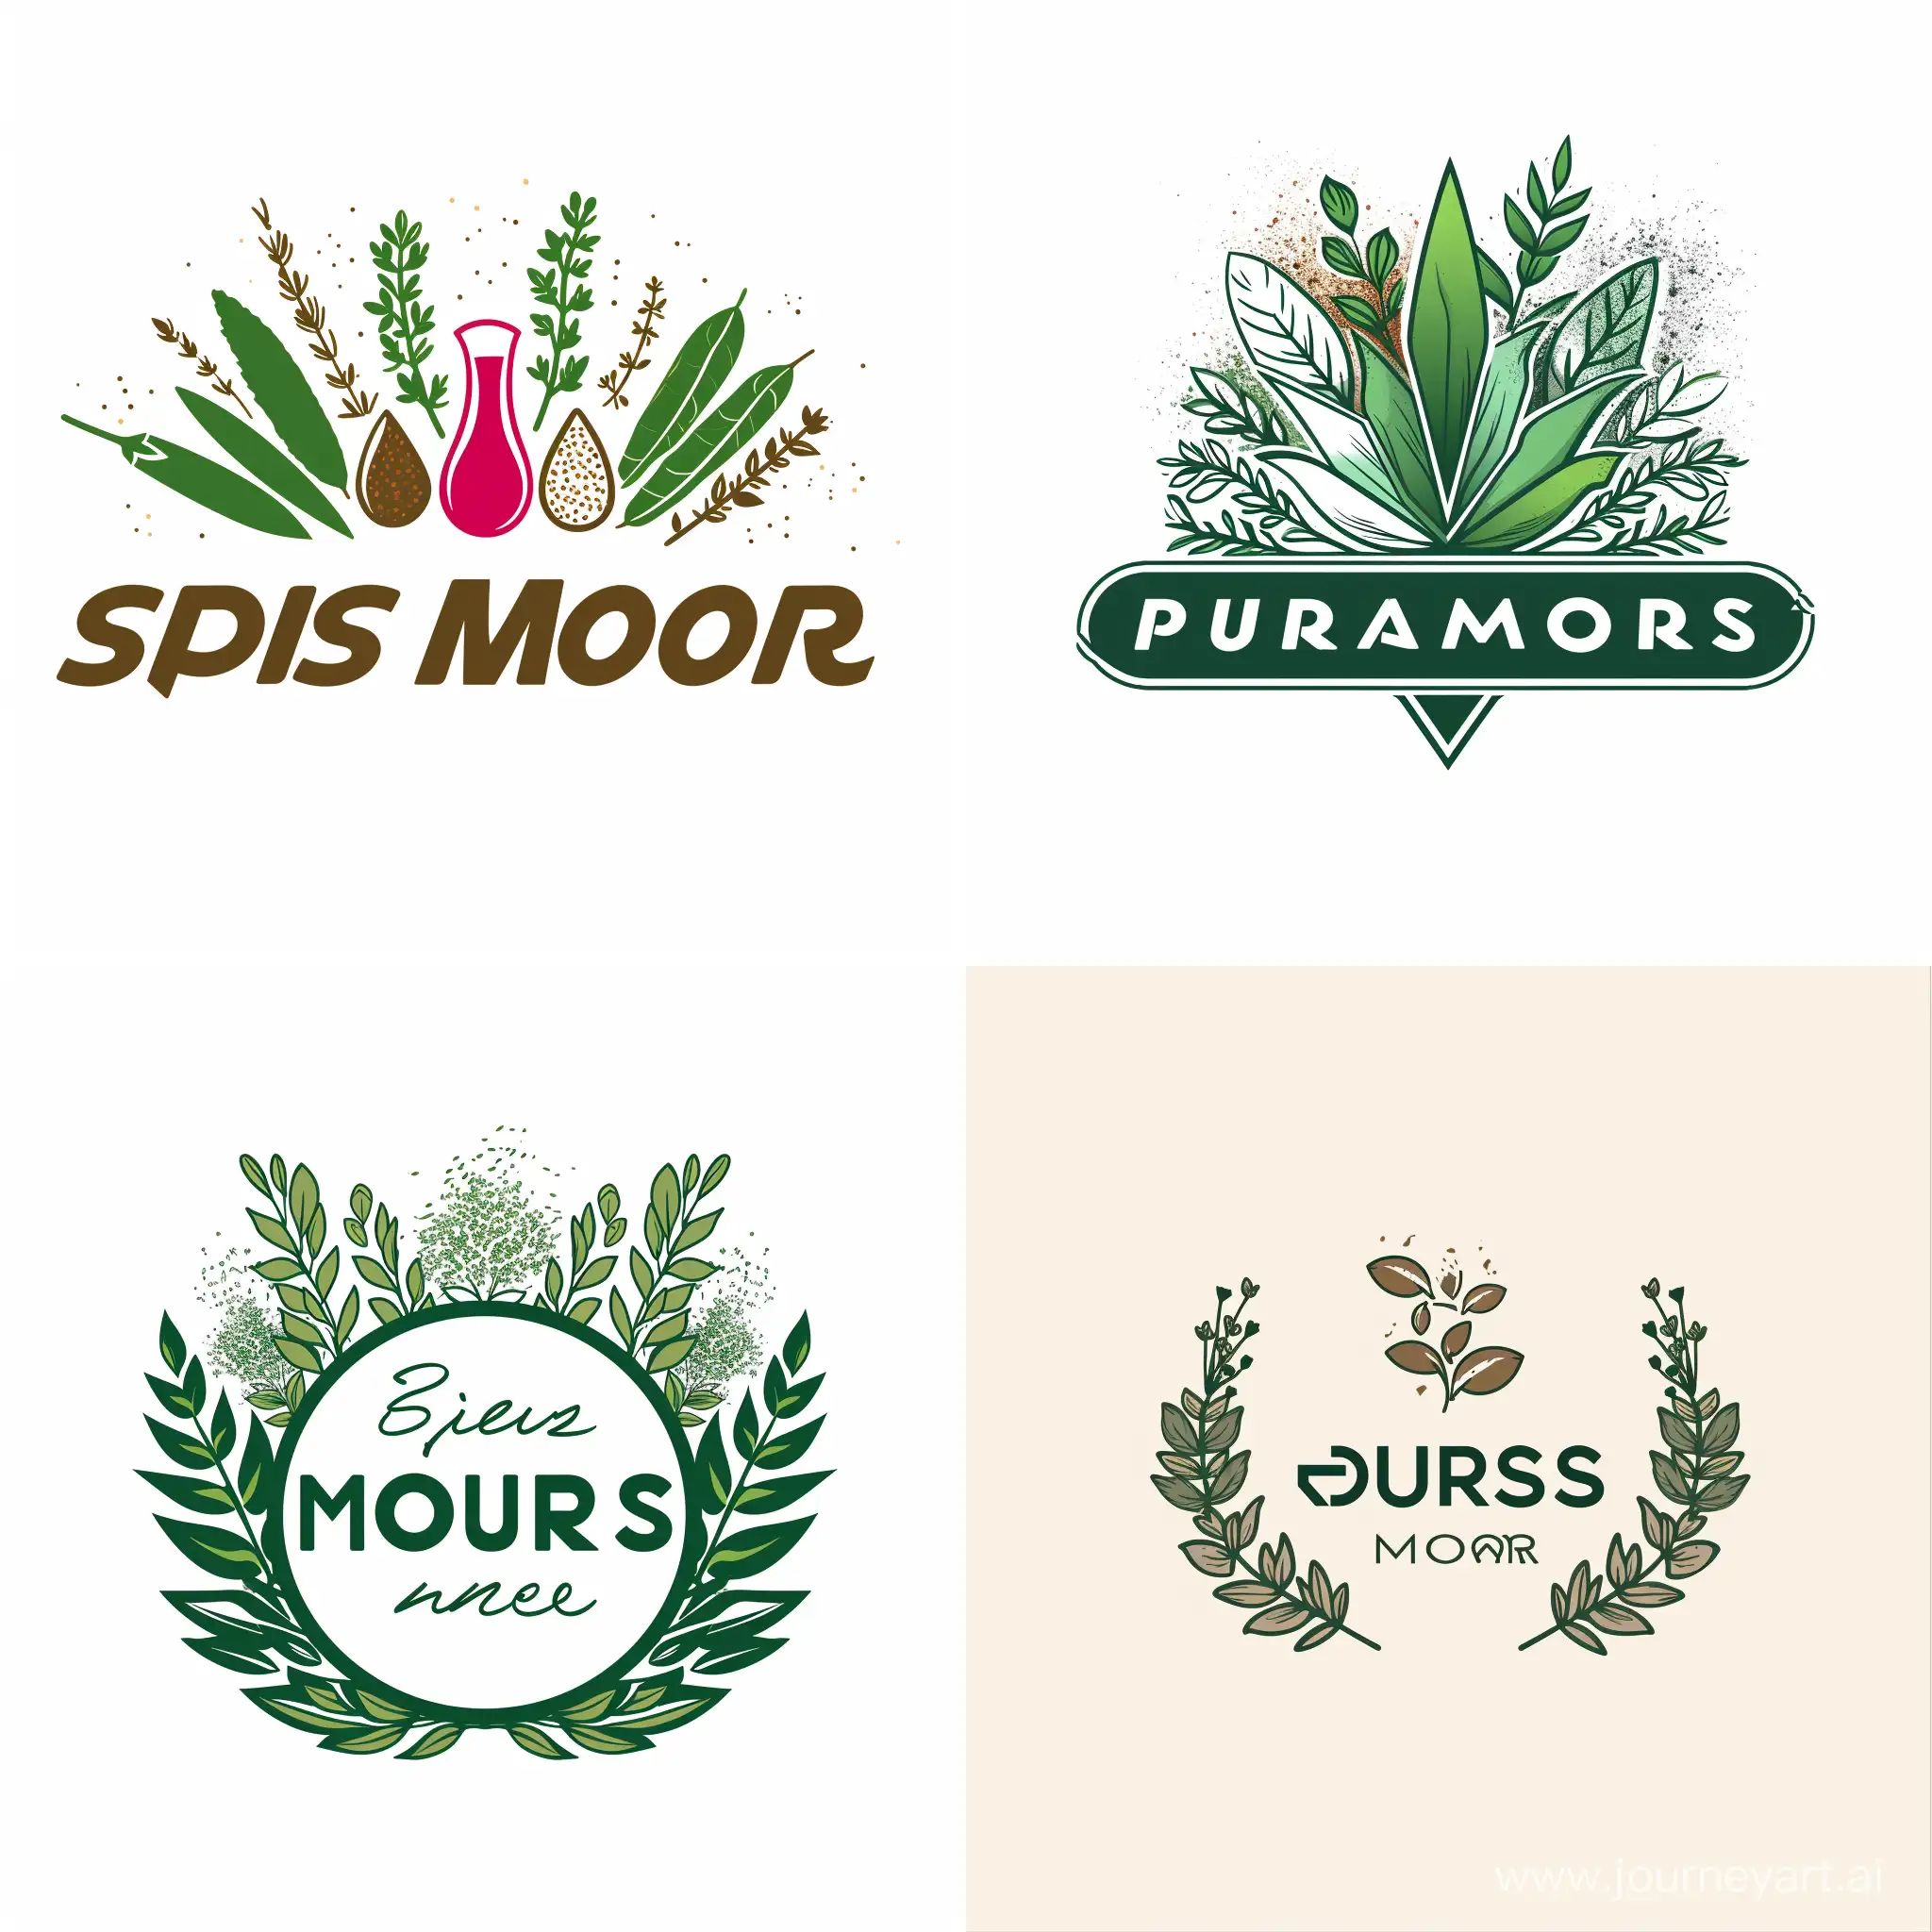 Spice and more logo 
A herbs compan